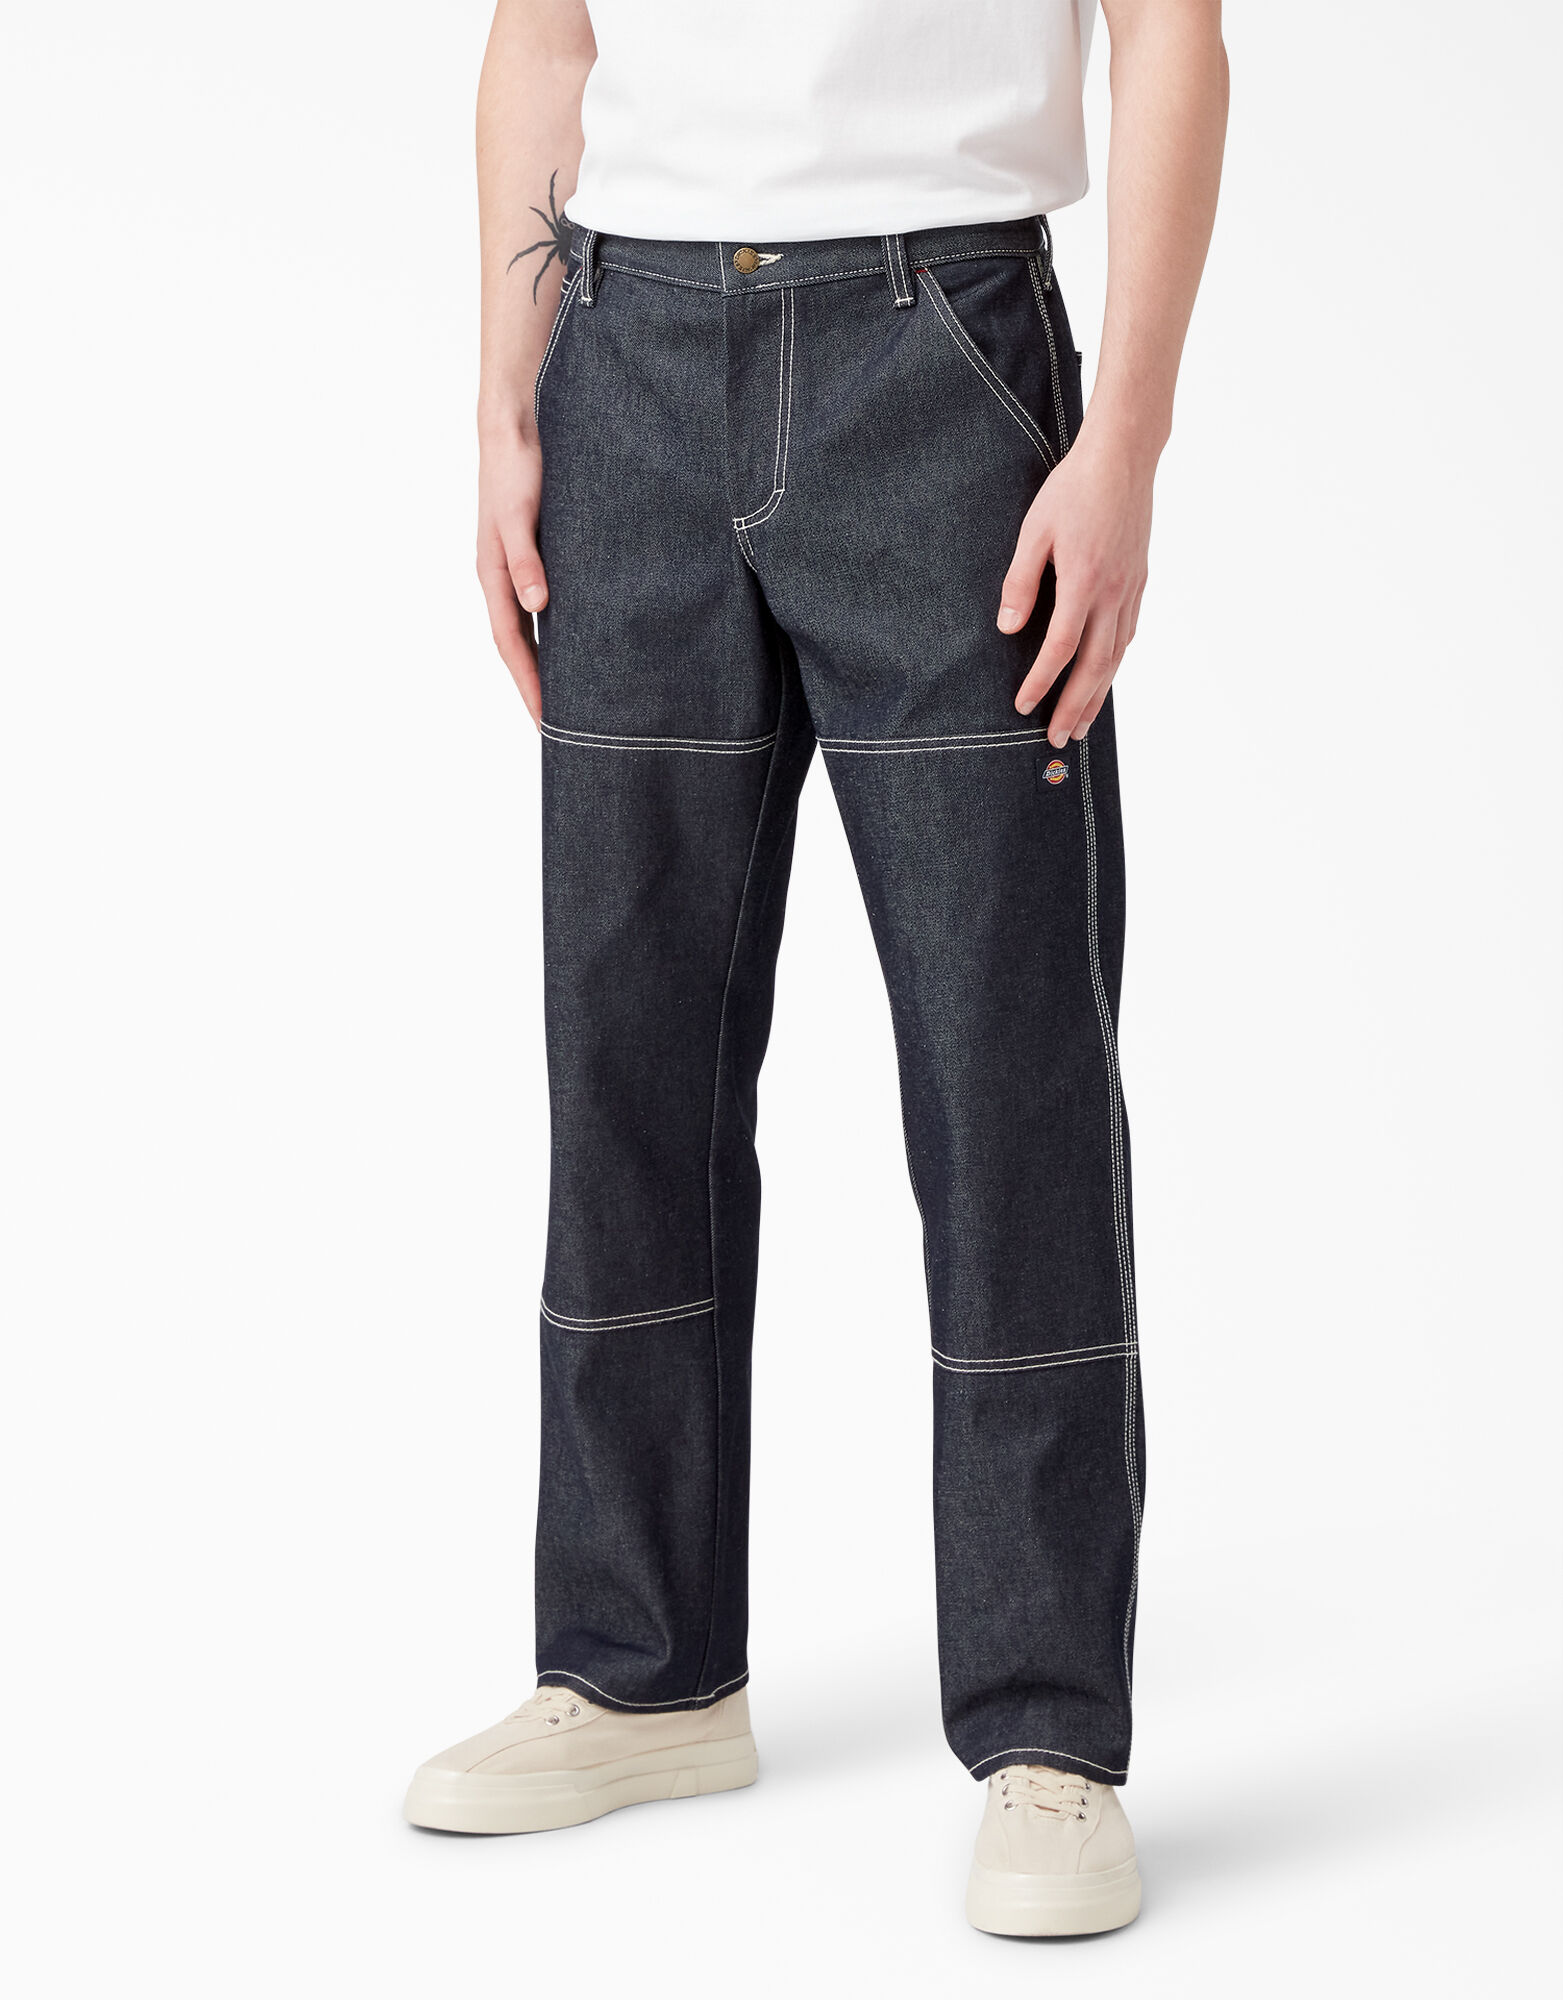 Men's Jeans - Work Jeans, Relaxed Jeans & Regular Fit Jeans for 